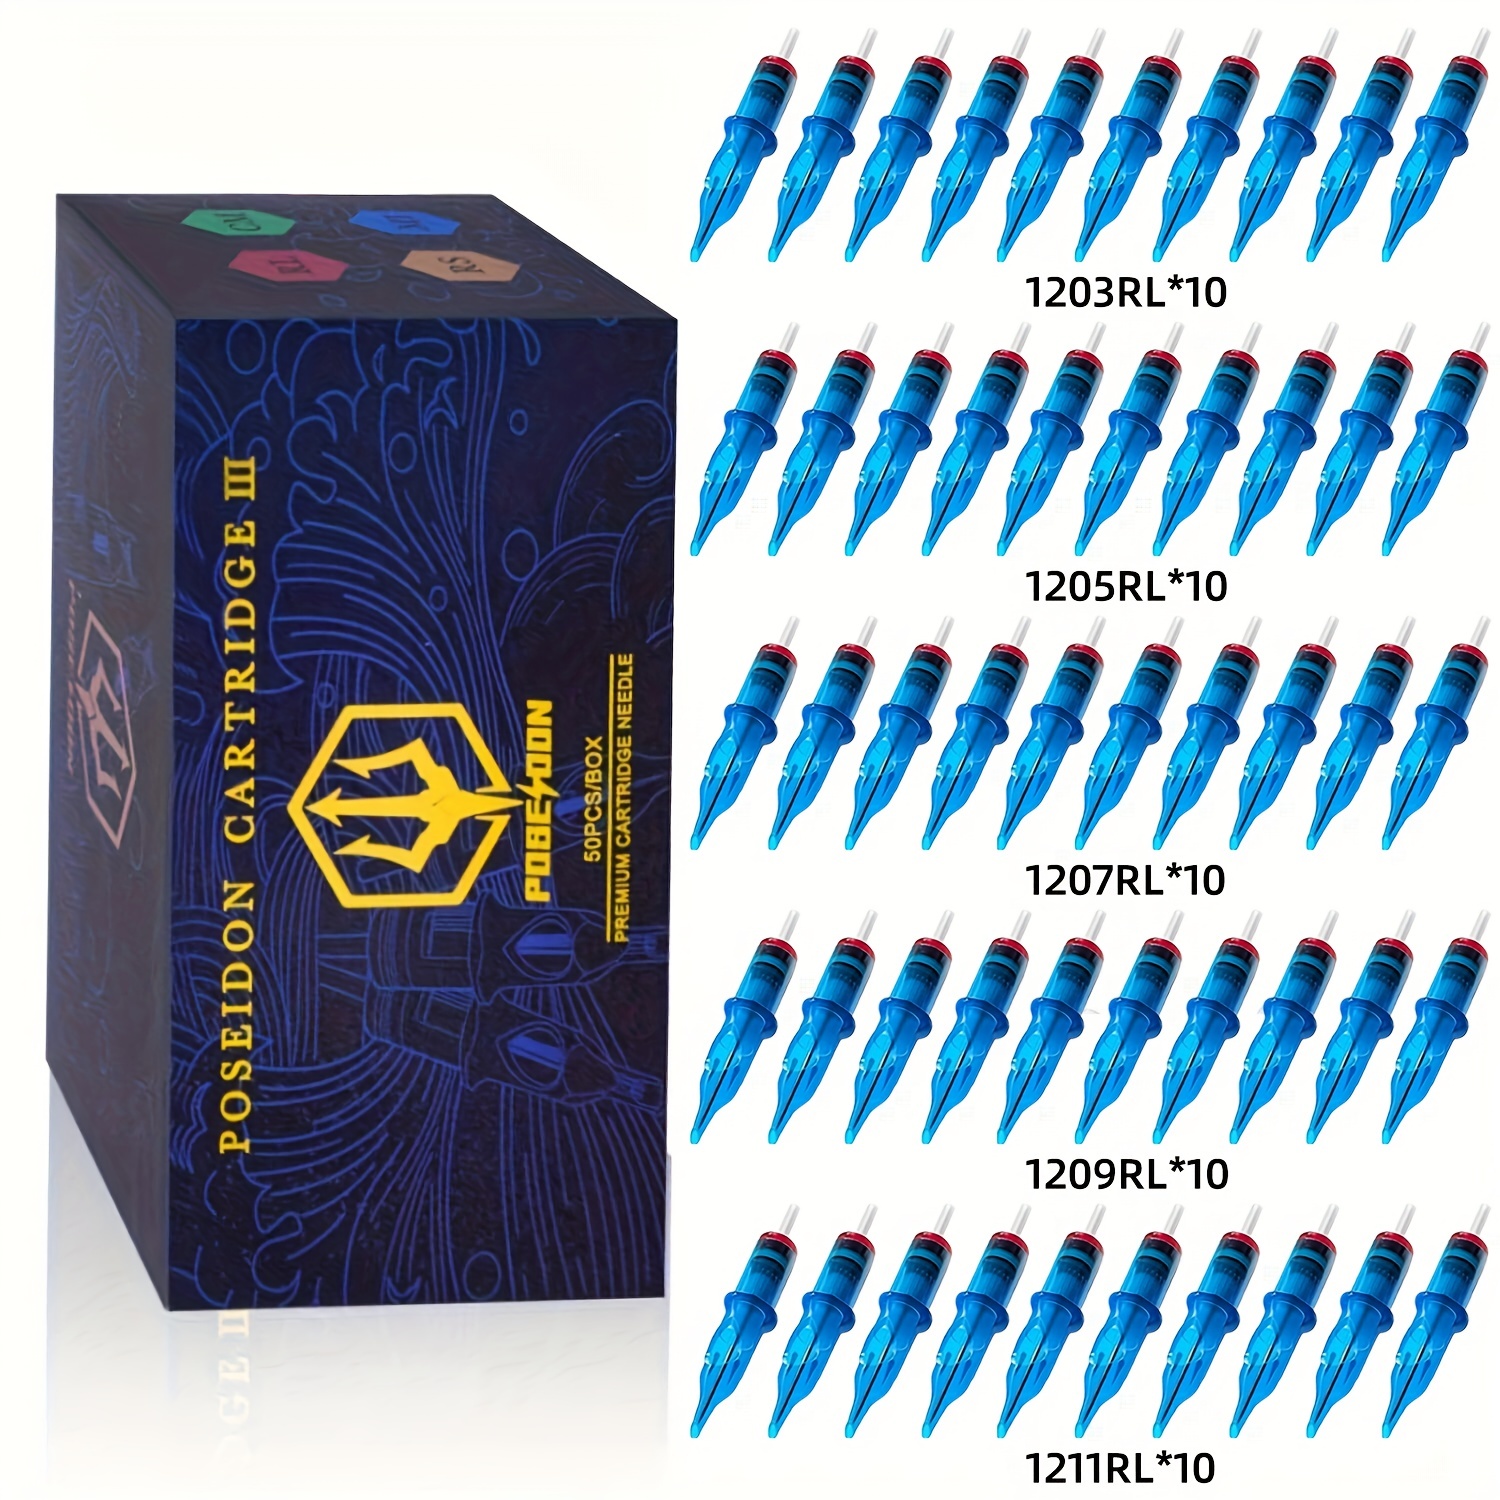 Wormhole 7RS Tattoo Needles 7 Round Shader #12 Standard Disposable &  Sterilized Tattoo Shading Needles with Blue Dot - Box of 50 (1207RS)